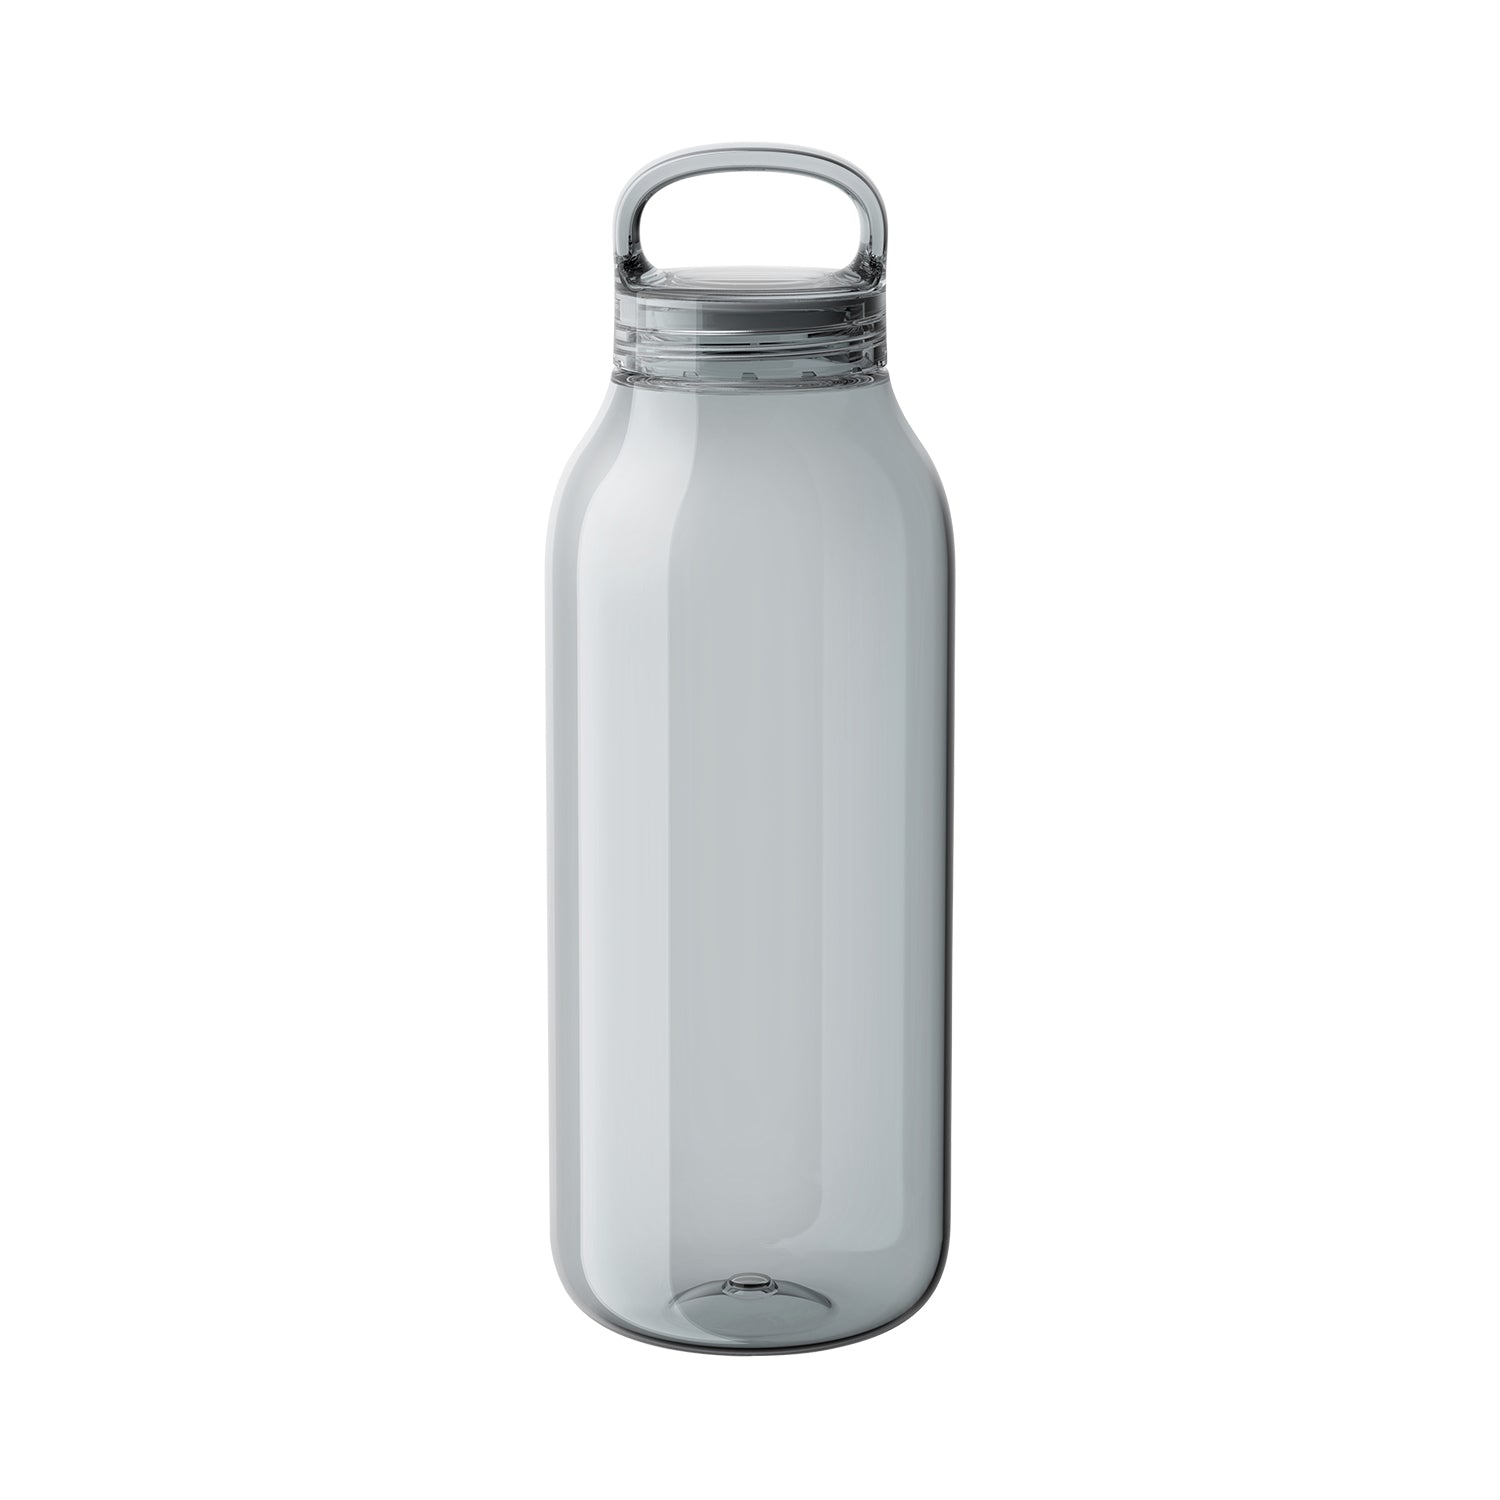 Smoked copolyester flask 500ml